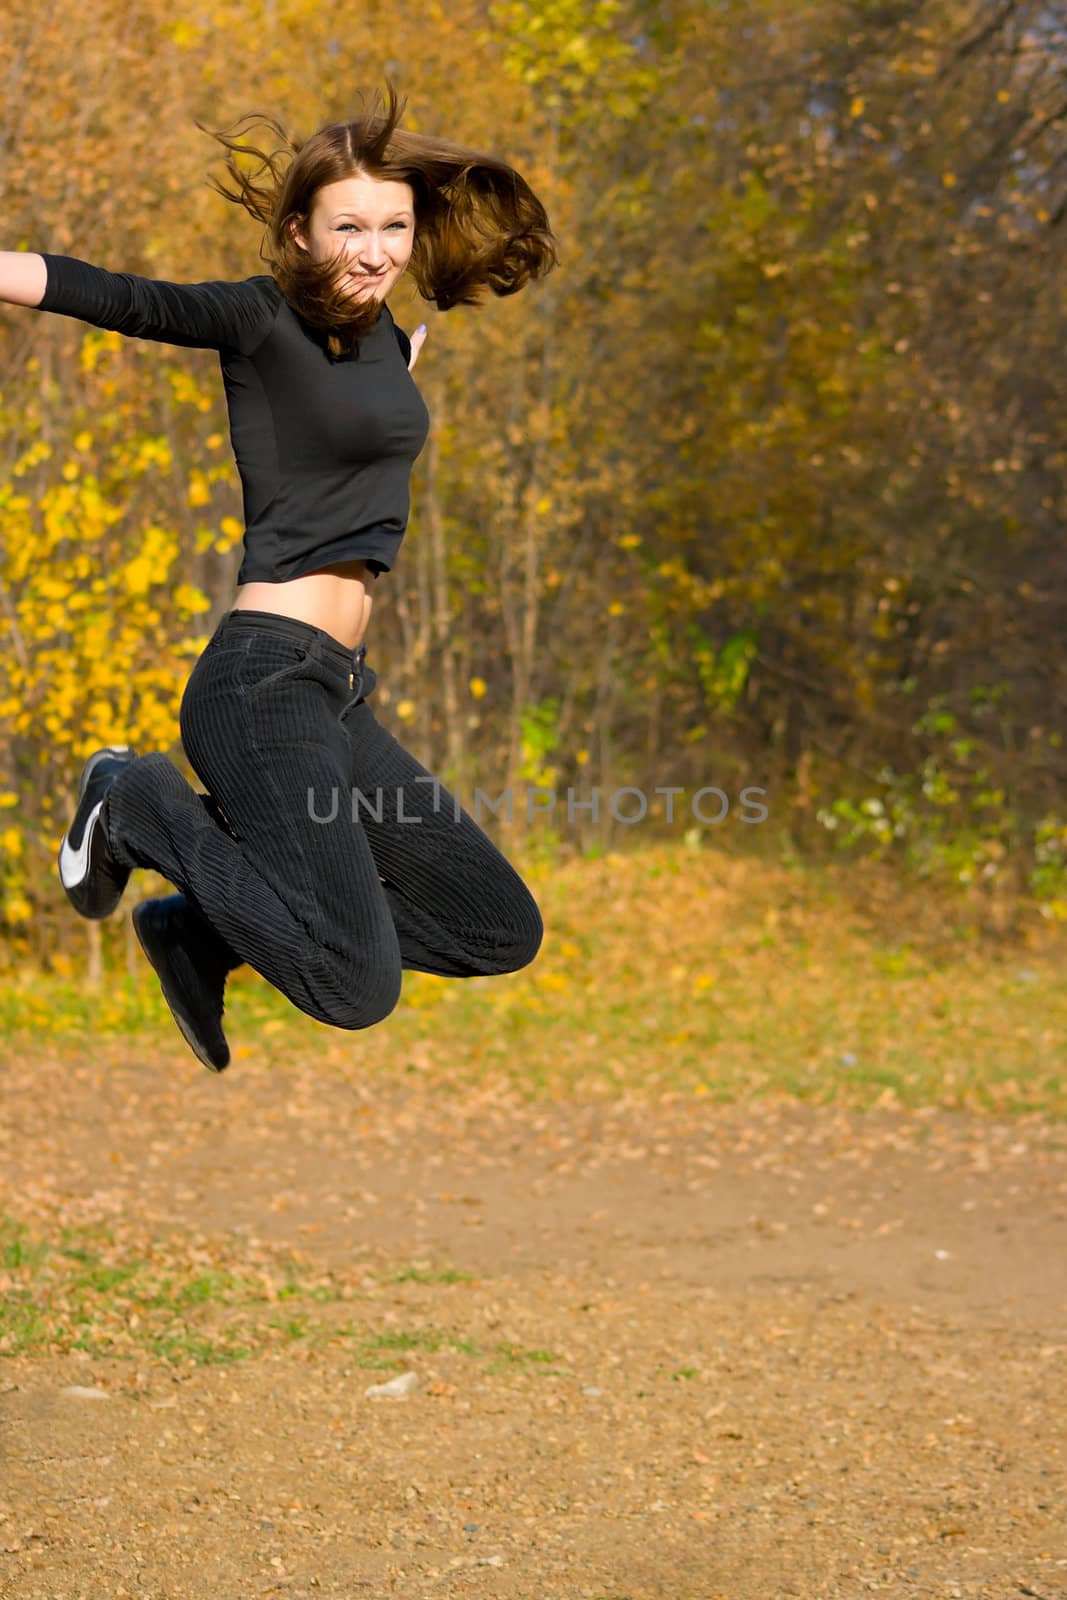 The jumping girl against the autumn nature